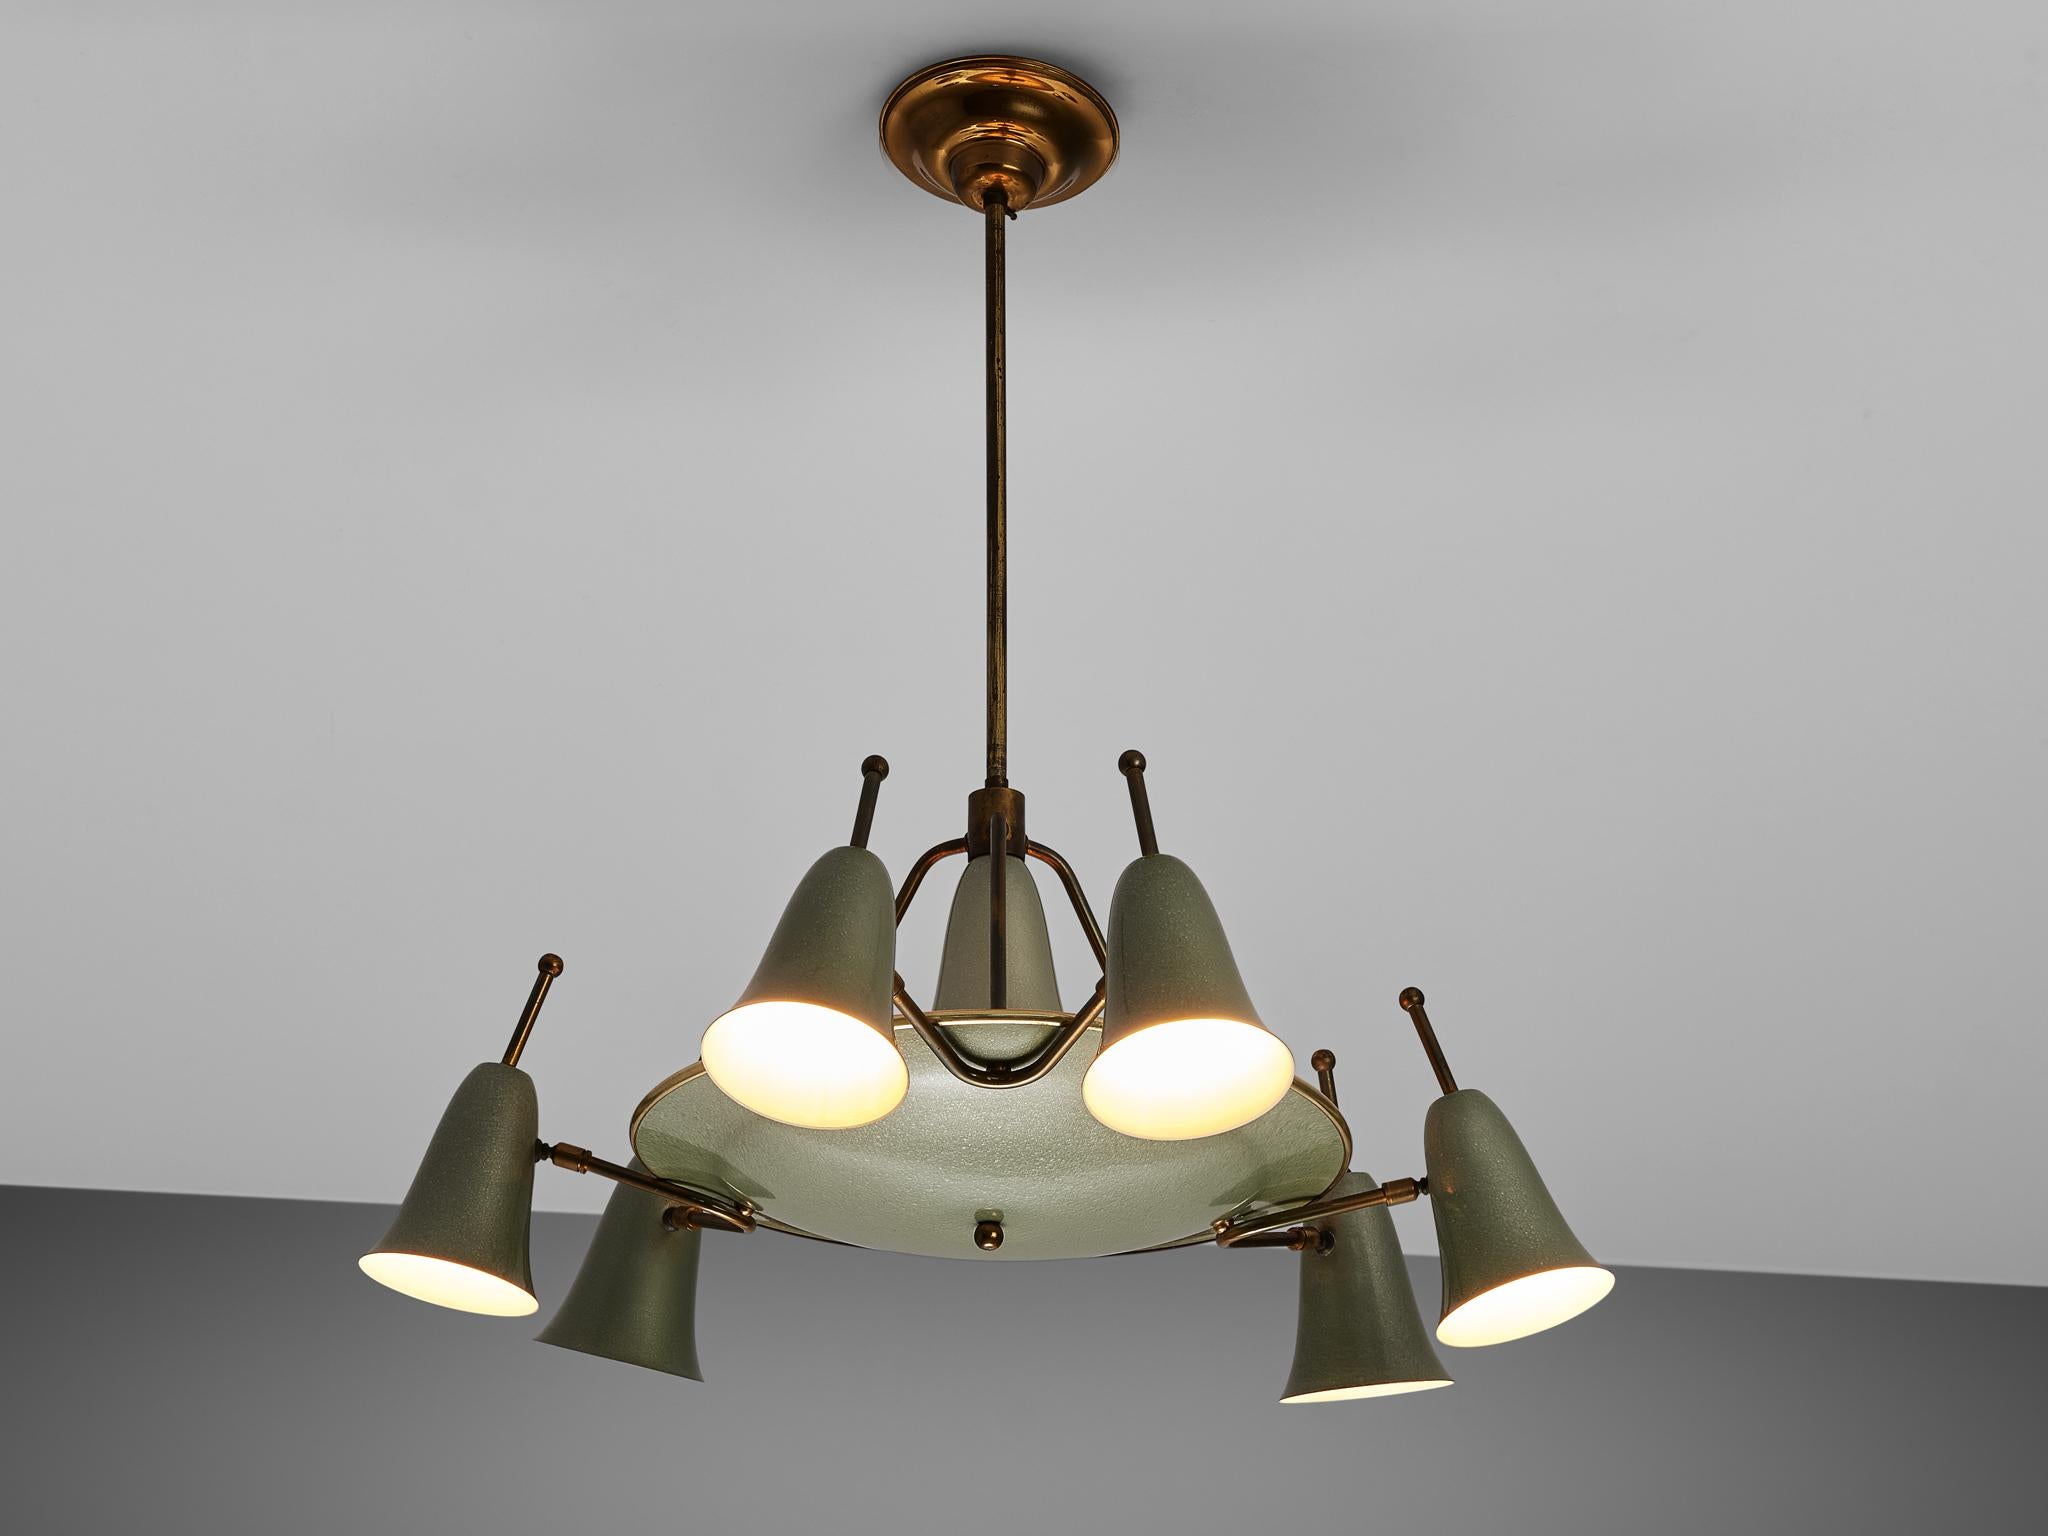 Tripod ceiling light, metal and brass, Europe, 1960s.

Chandelier made out of six adjustable shades paired in groups of two. The green color of the lamp fits perfectly with the metal, giving it an industrial look. The brass details balance this